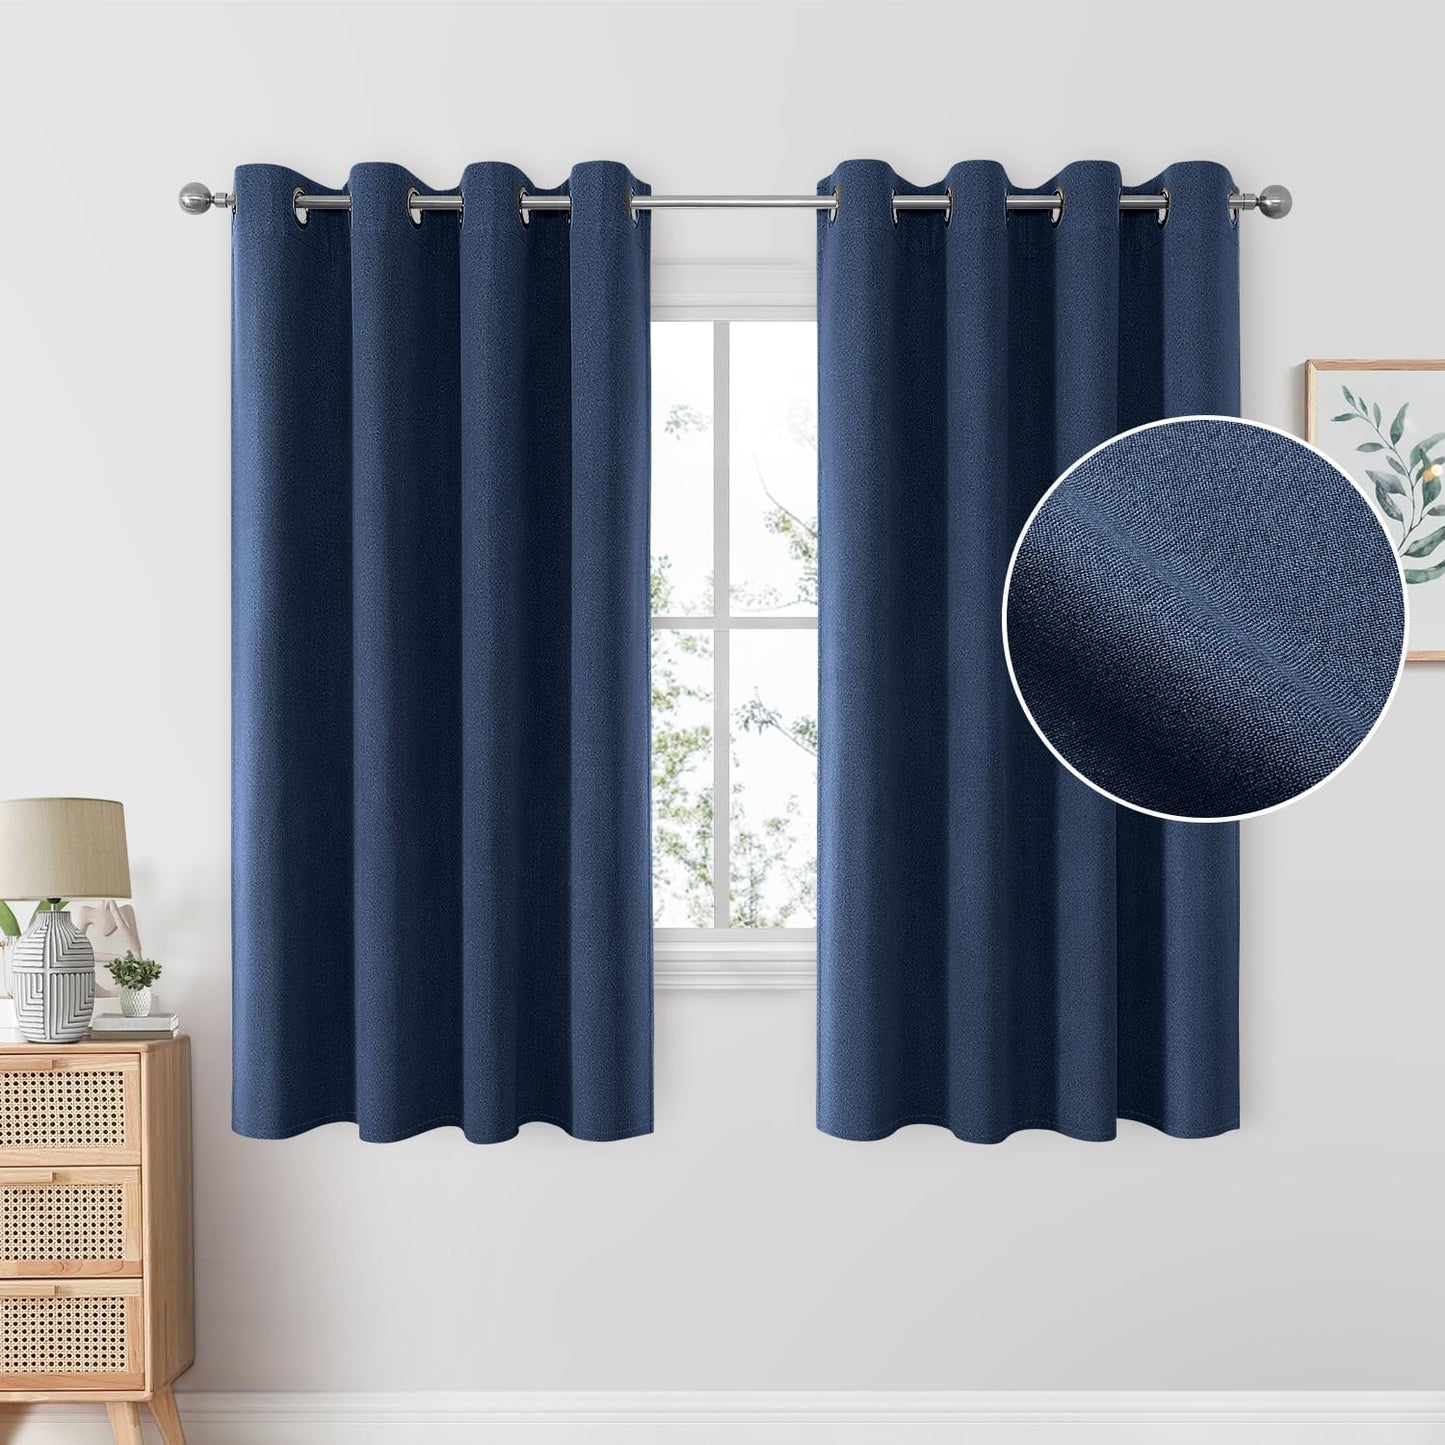 HOMEIDEAS 100% Blush Pink Linen Blackout Curtains for Bedroom, 52 X 84 Inch Room Darkening Curtains for Living, Faux Linen Thermal Insulated Full Black Out Grommet Window Curtains/Drapes  HOMEIDEAS Navy Blue W52" X L63" 